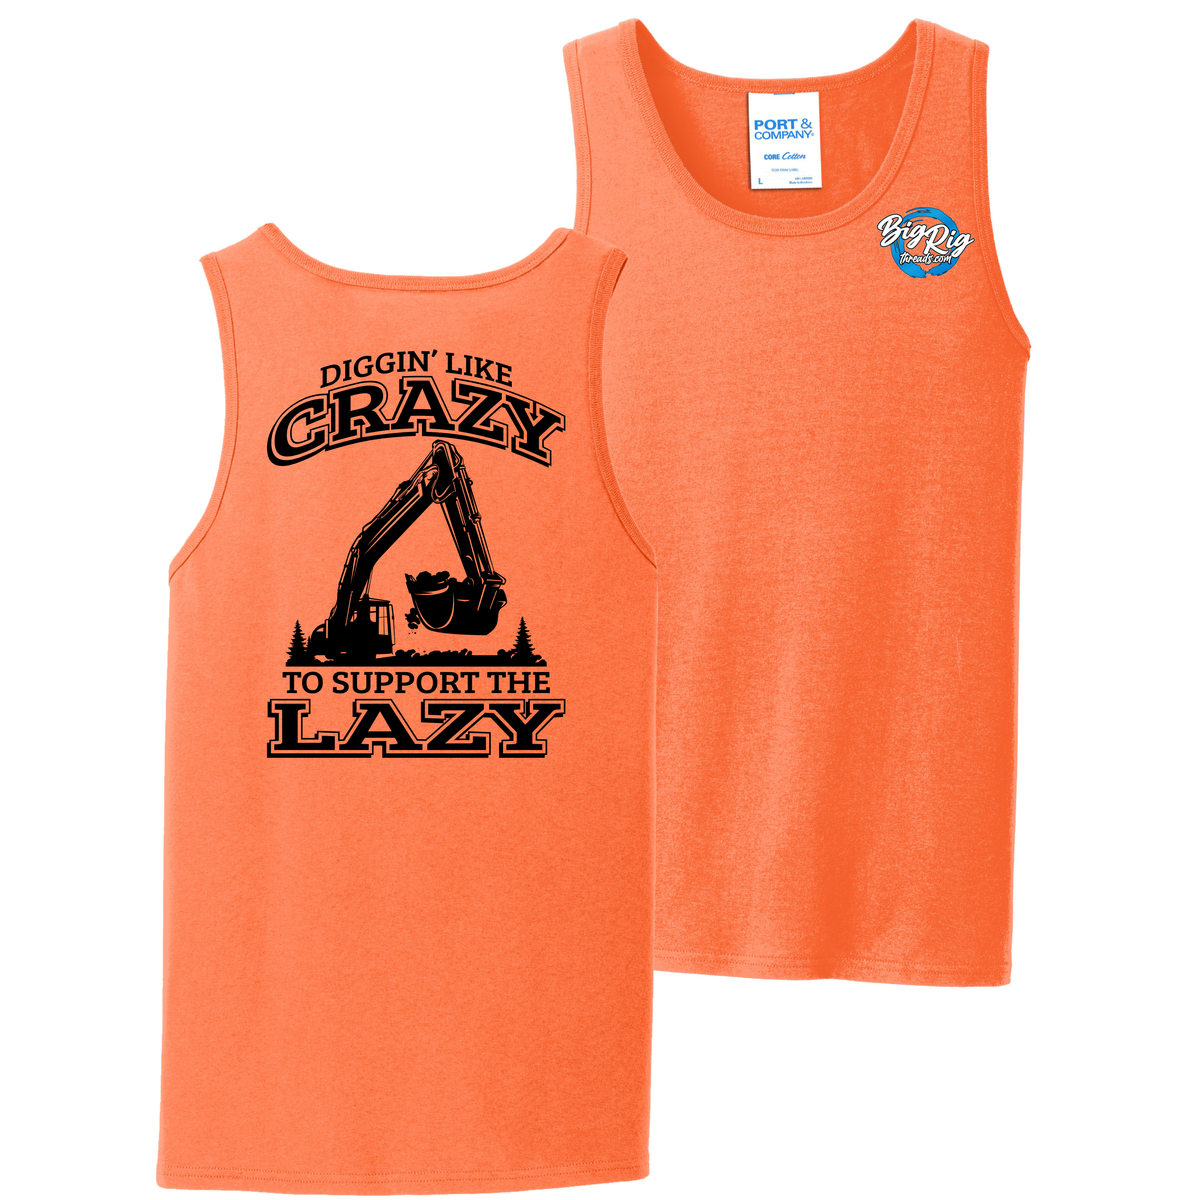 Diggin' Like Crazy To Support The Lazy - Excavator - Tank Top